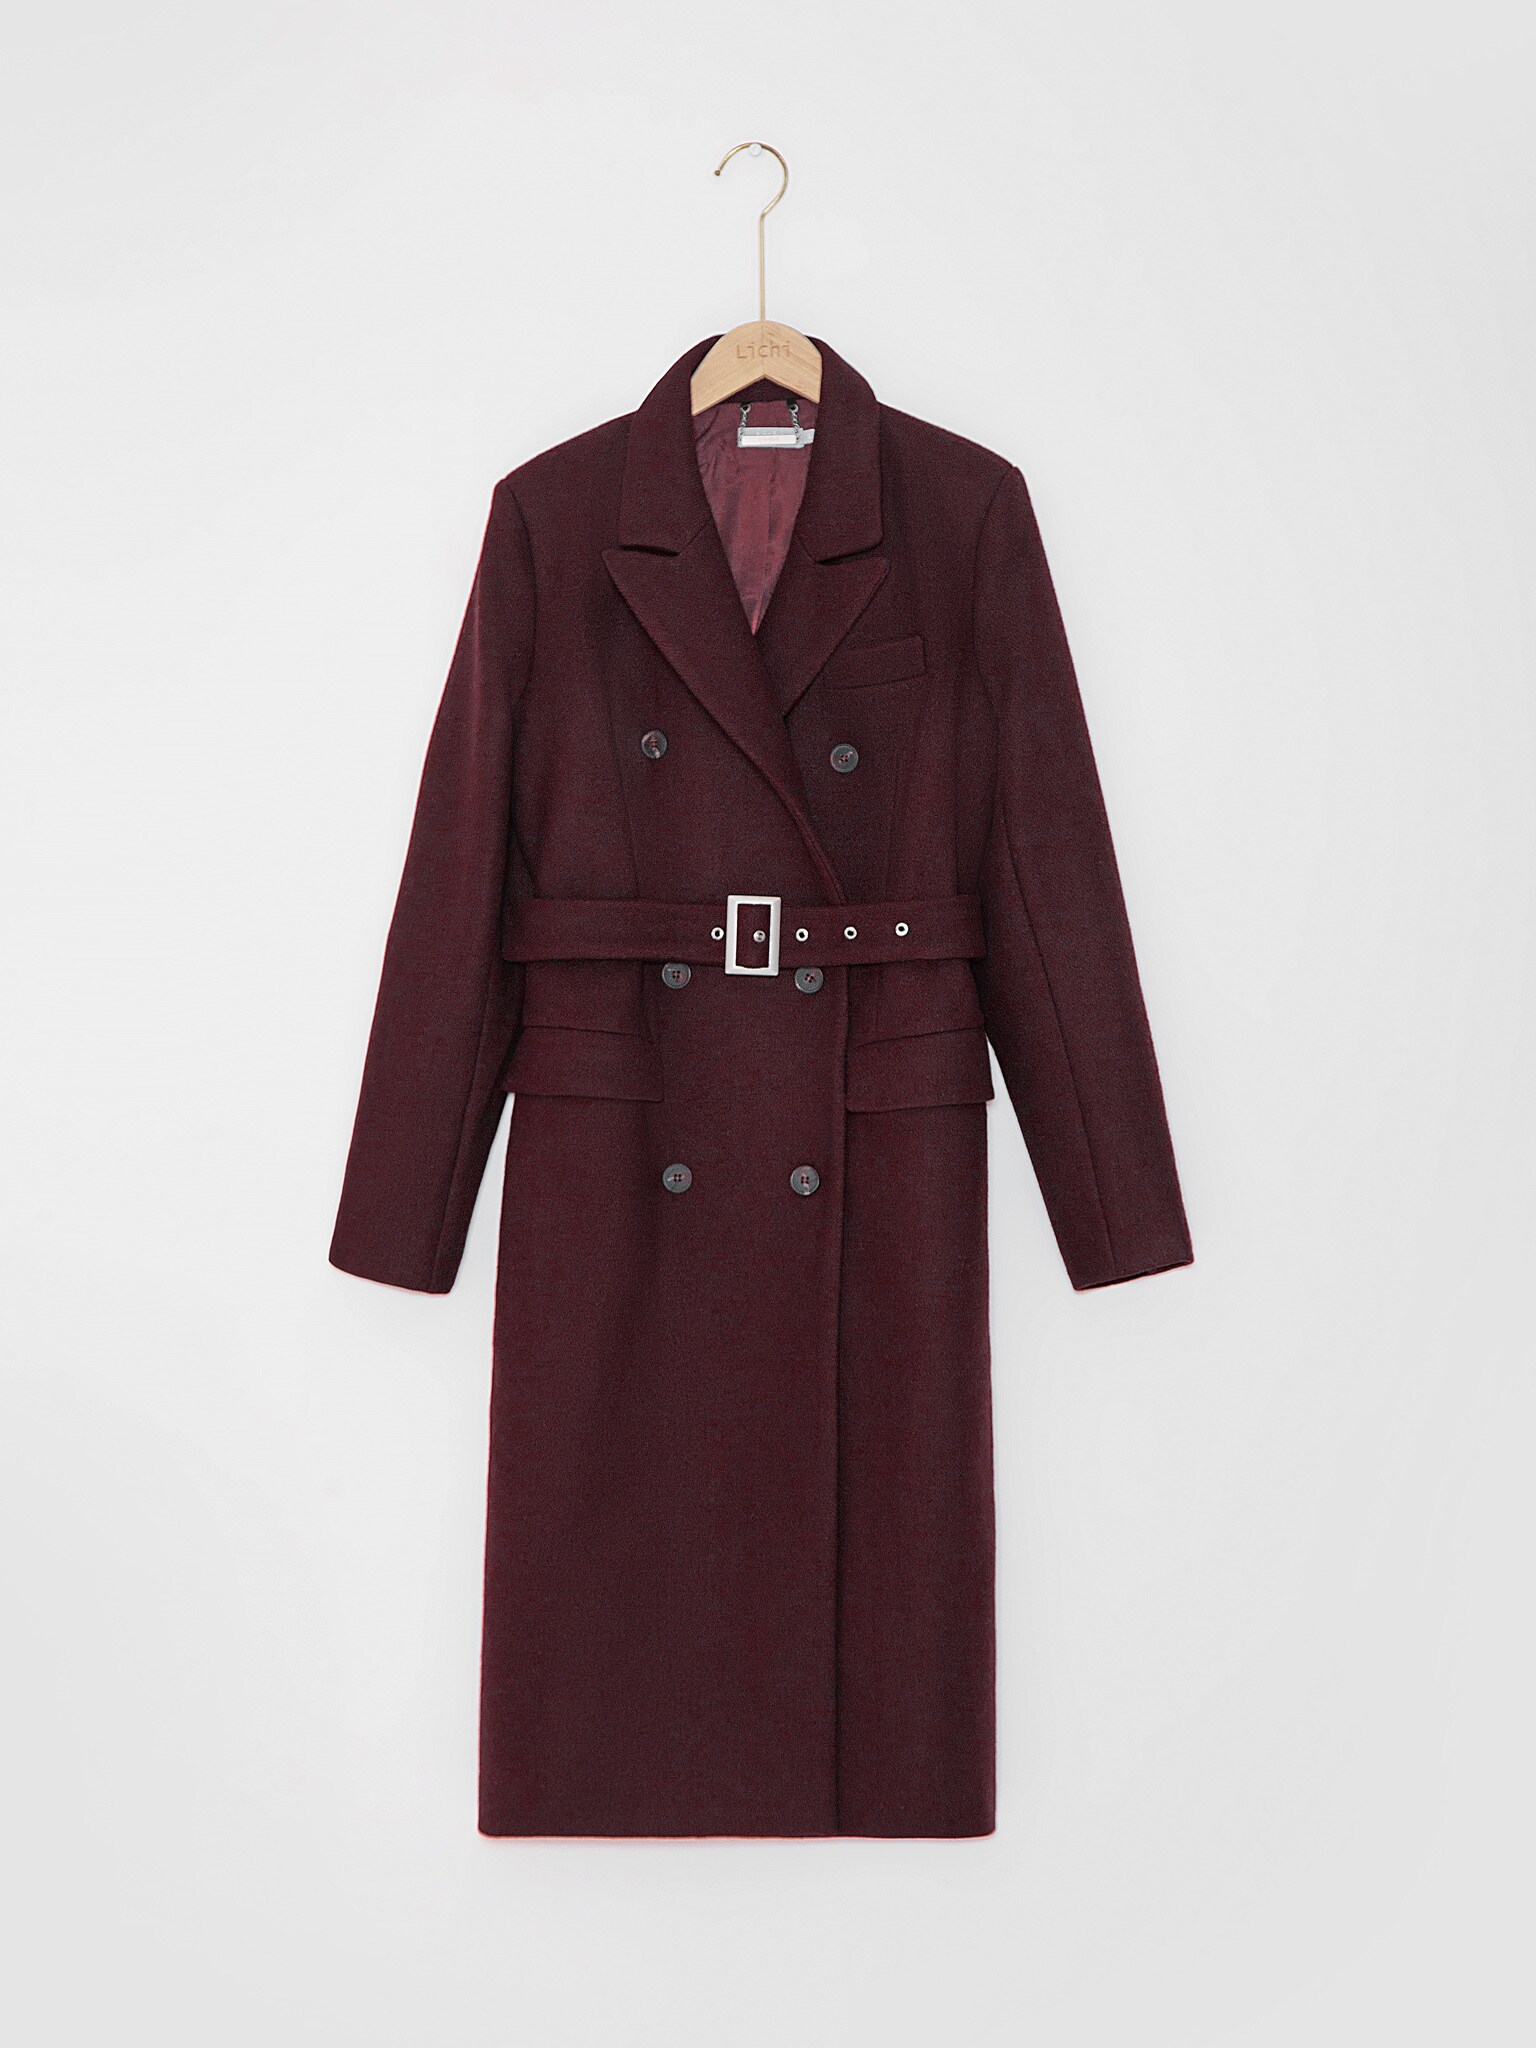 LICHI - Online fashion store :: Double-breasted coat complete with belt